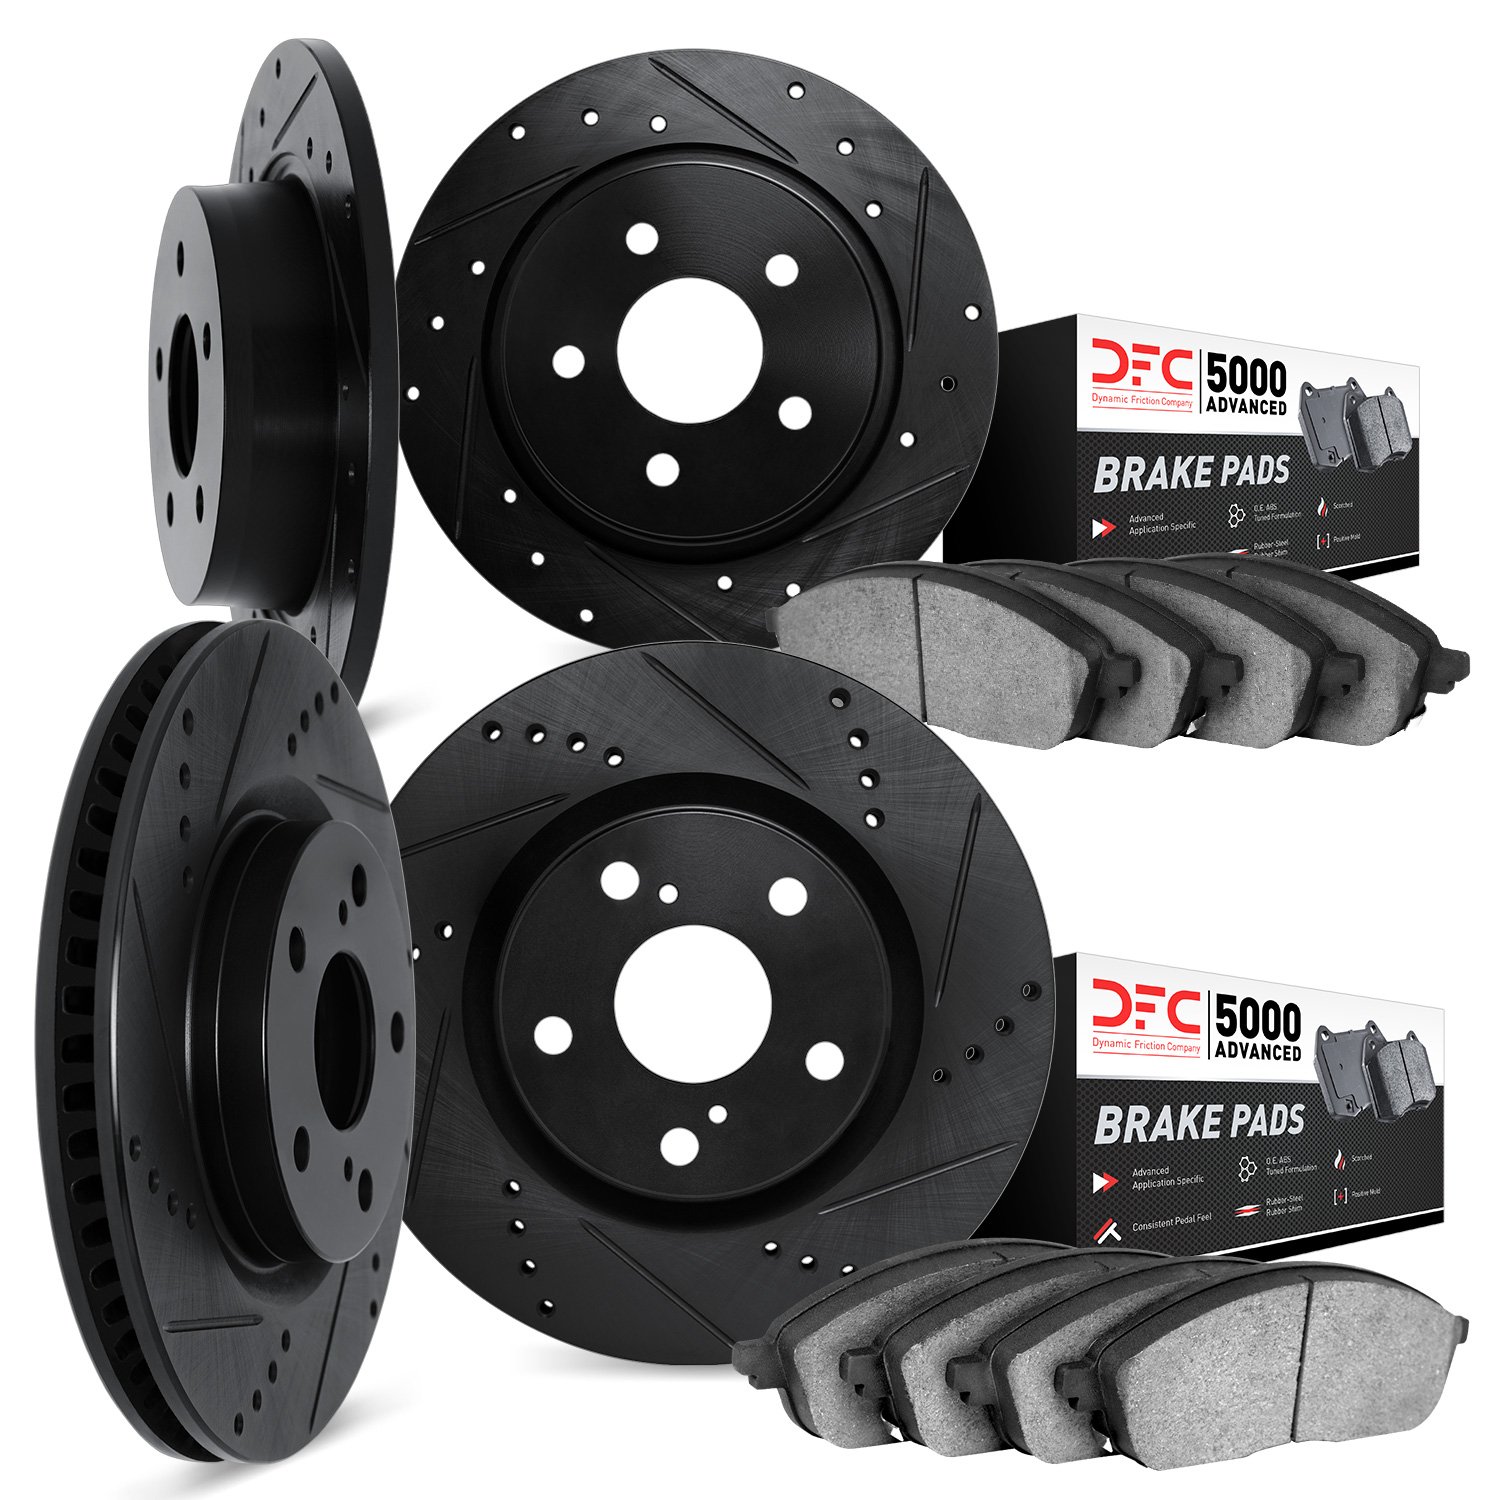 8504-27001 Drilled/Slotted Brake Rotors w/5000 Advanced Brake Pads Kit [Black], 1976-1993 Volvo, Position: Front and Rear